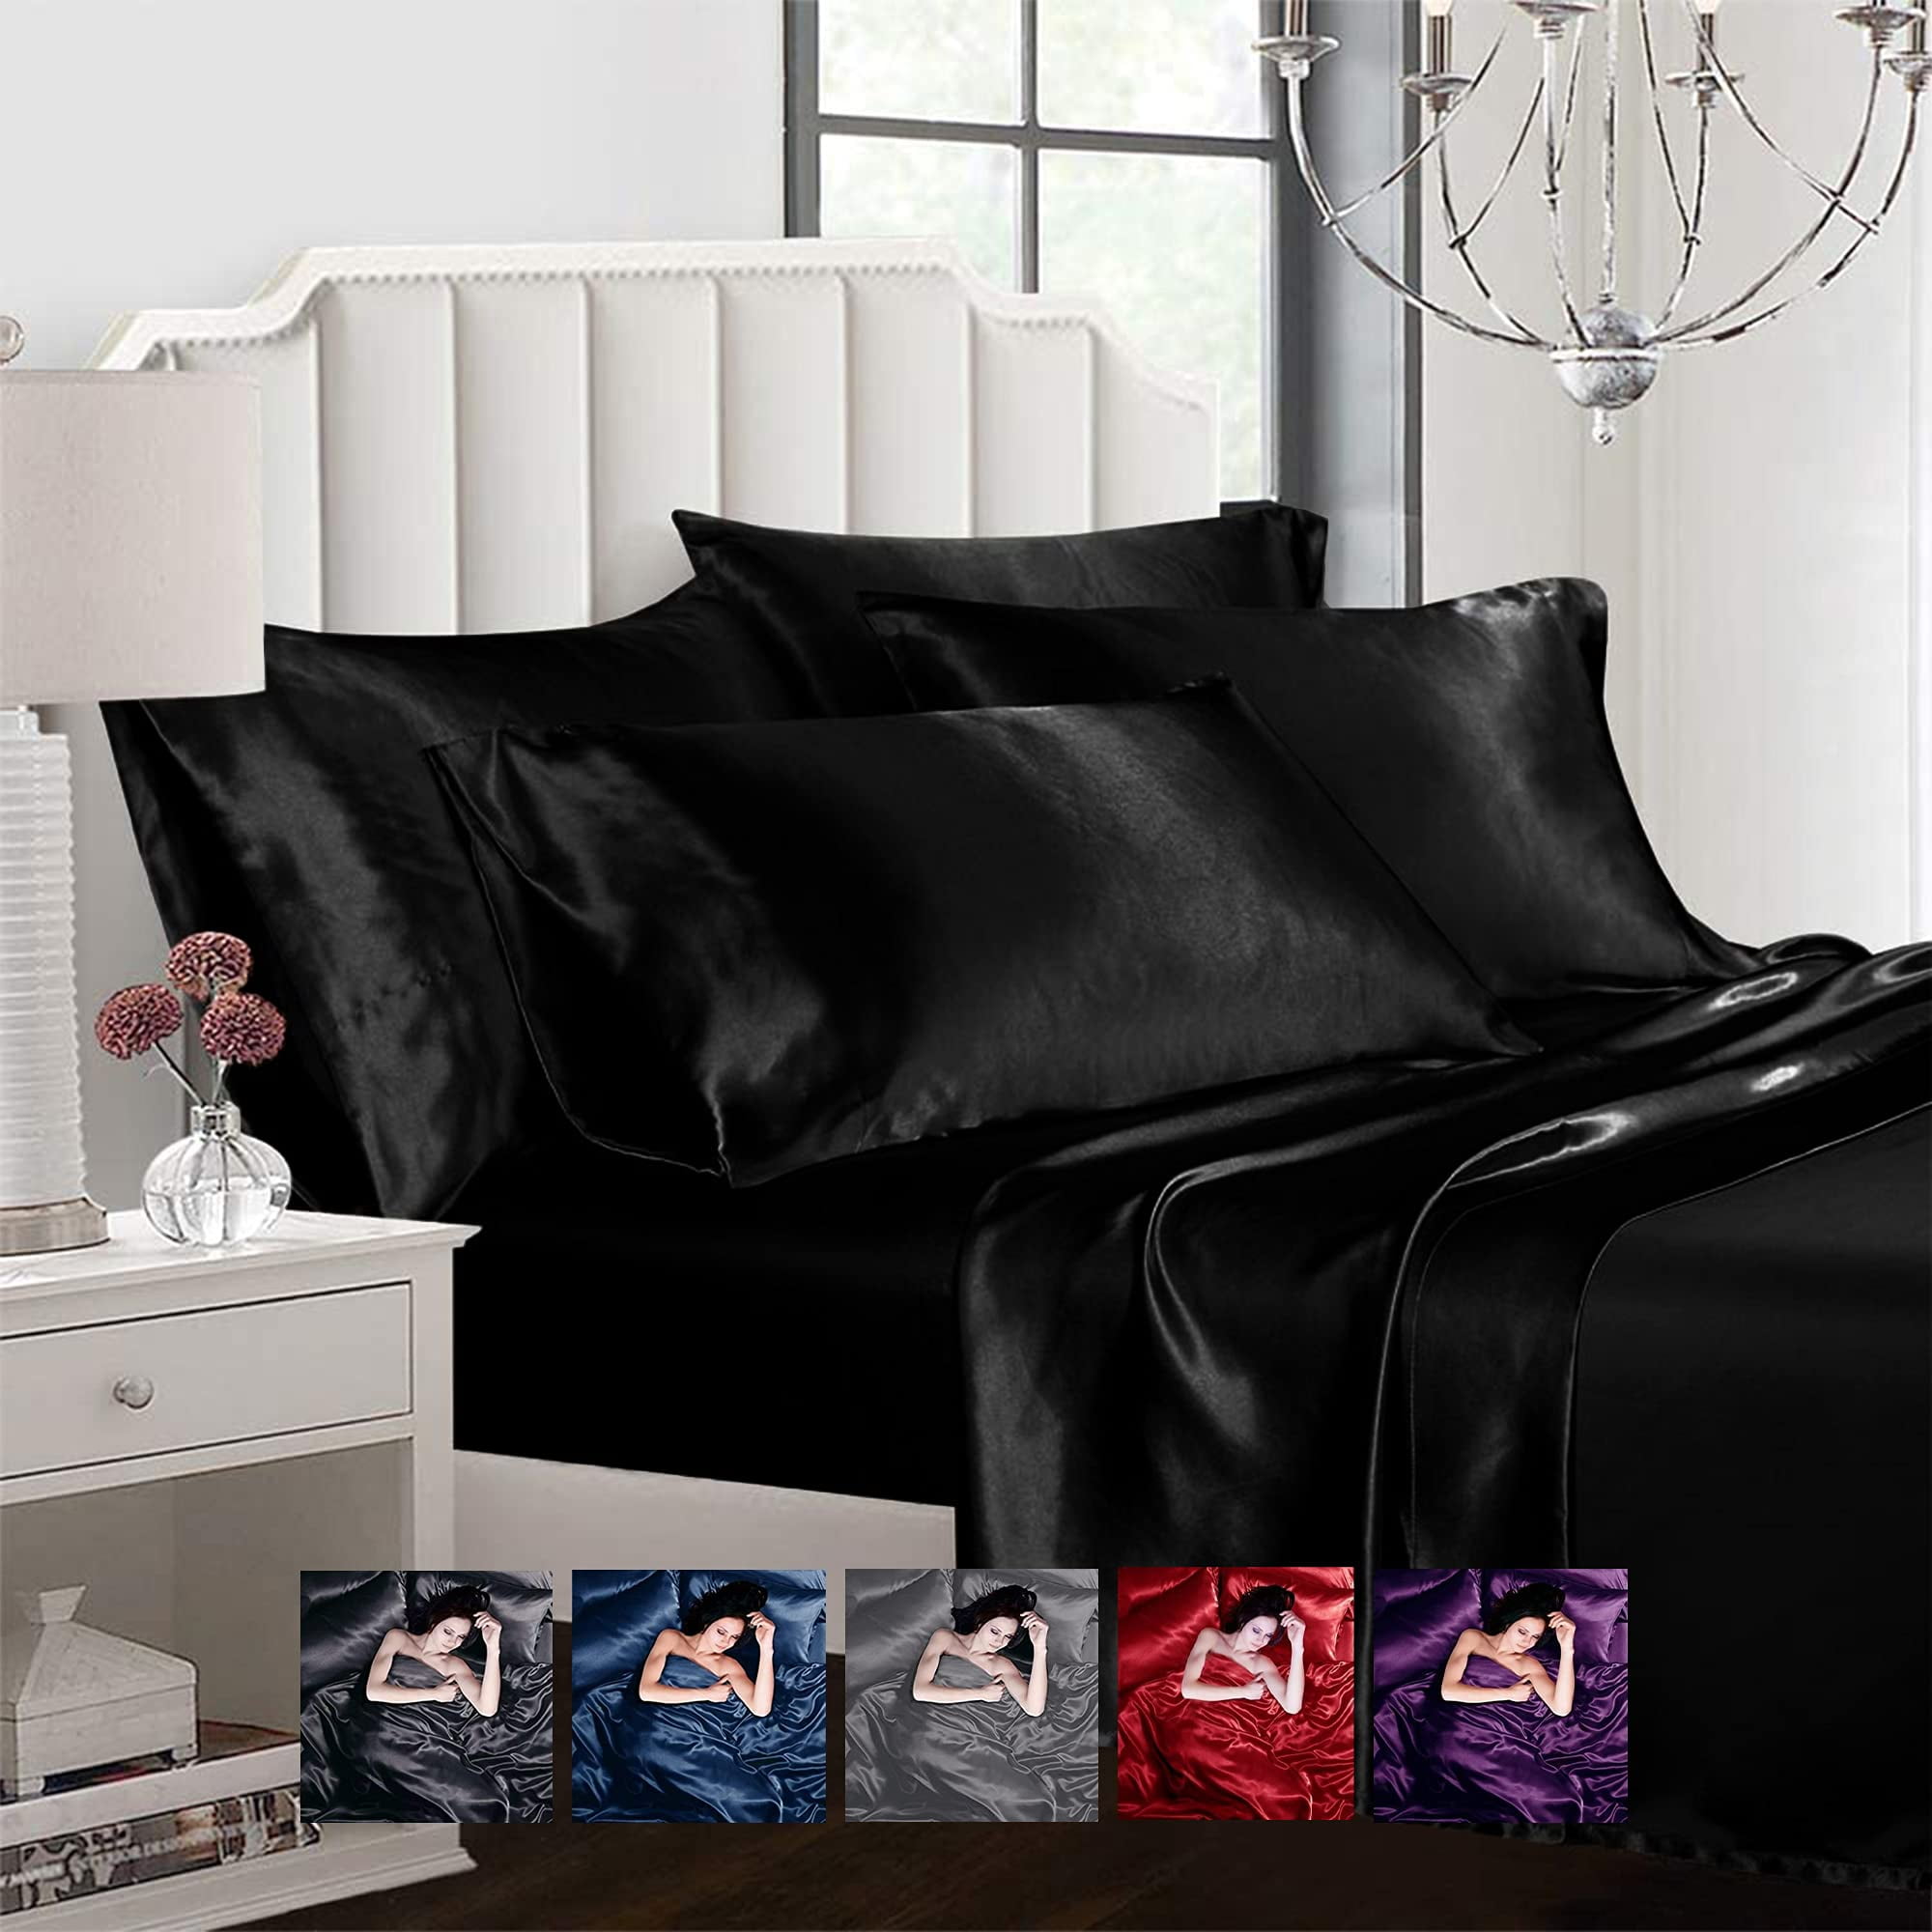 New Silky Soft Satin Queen/King Quilt Cover Sheet Set Flat,Fitted,Pillowcases 